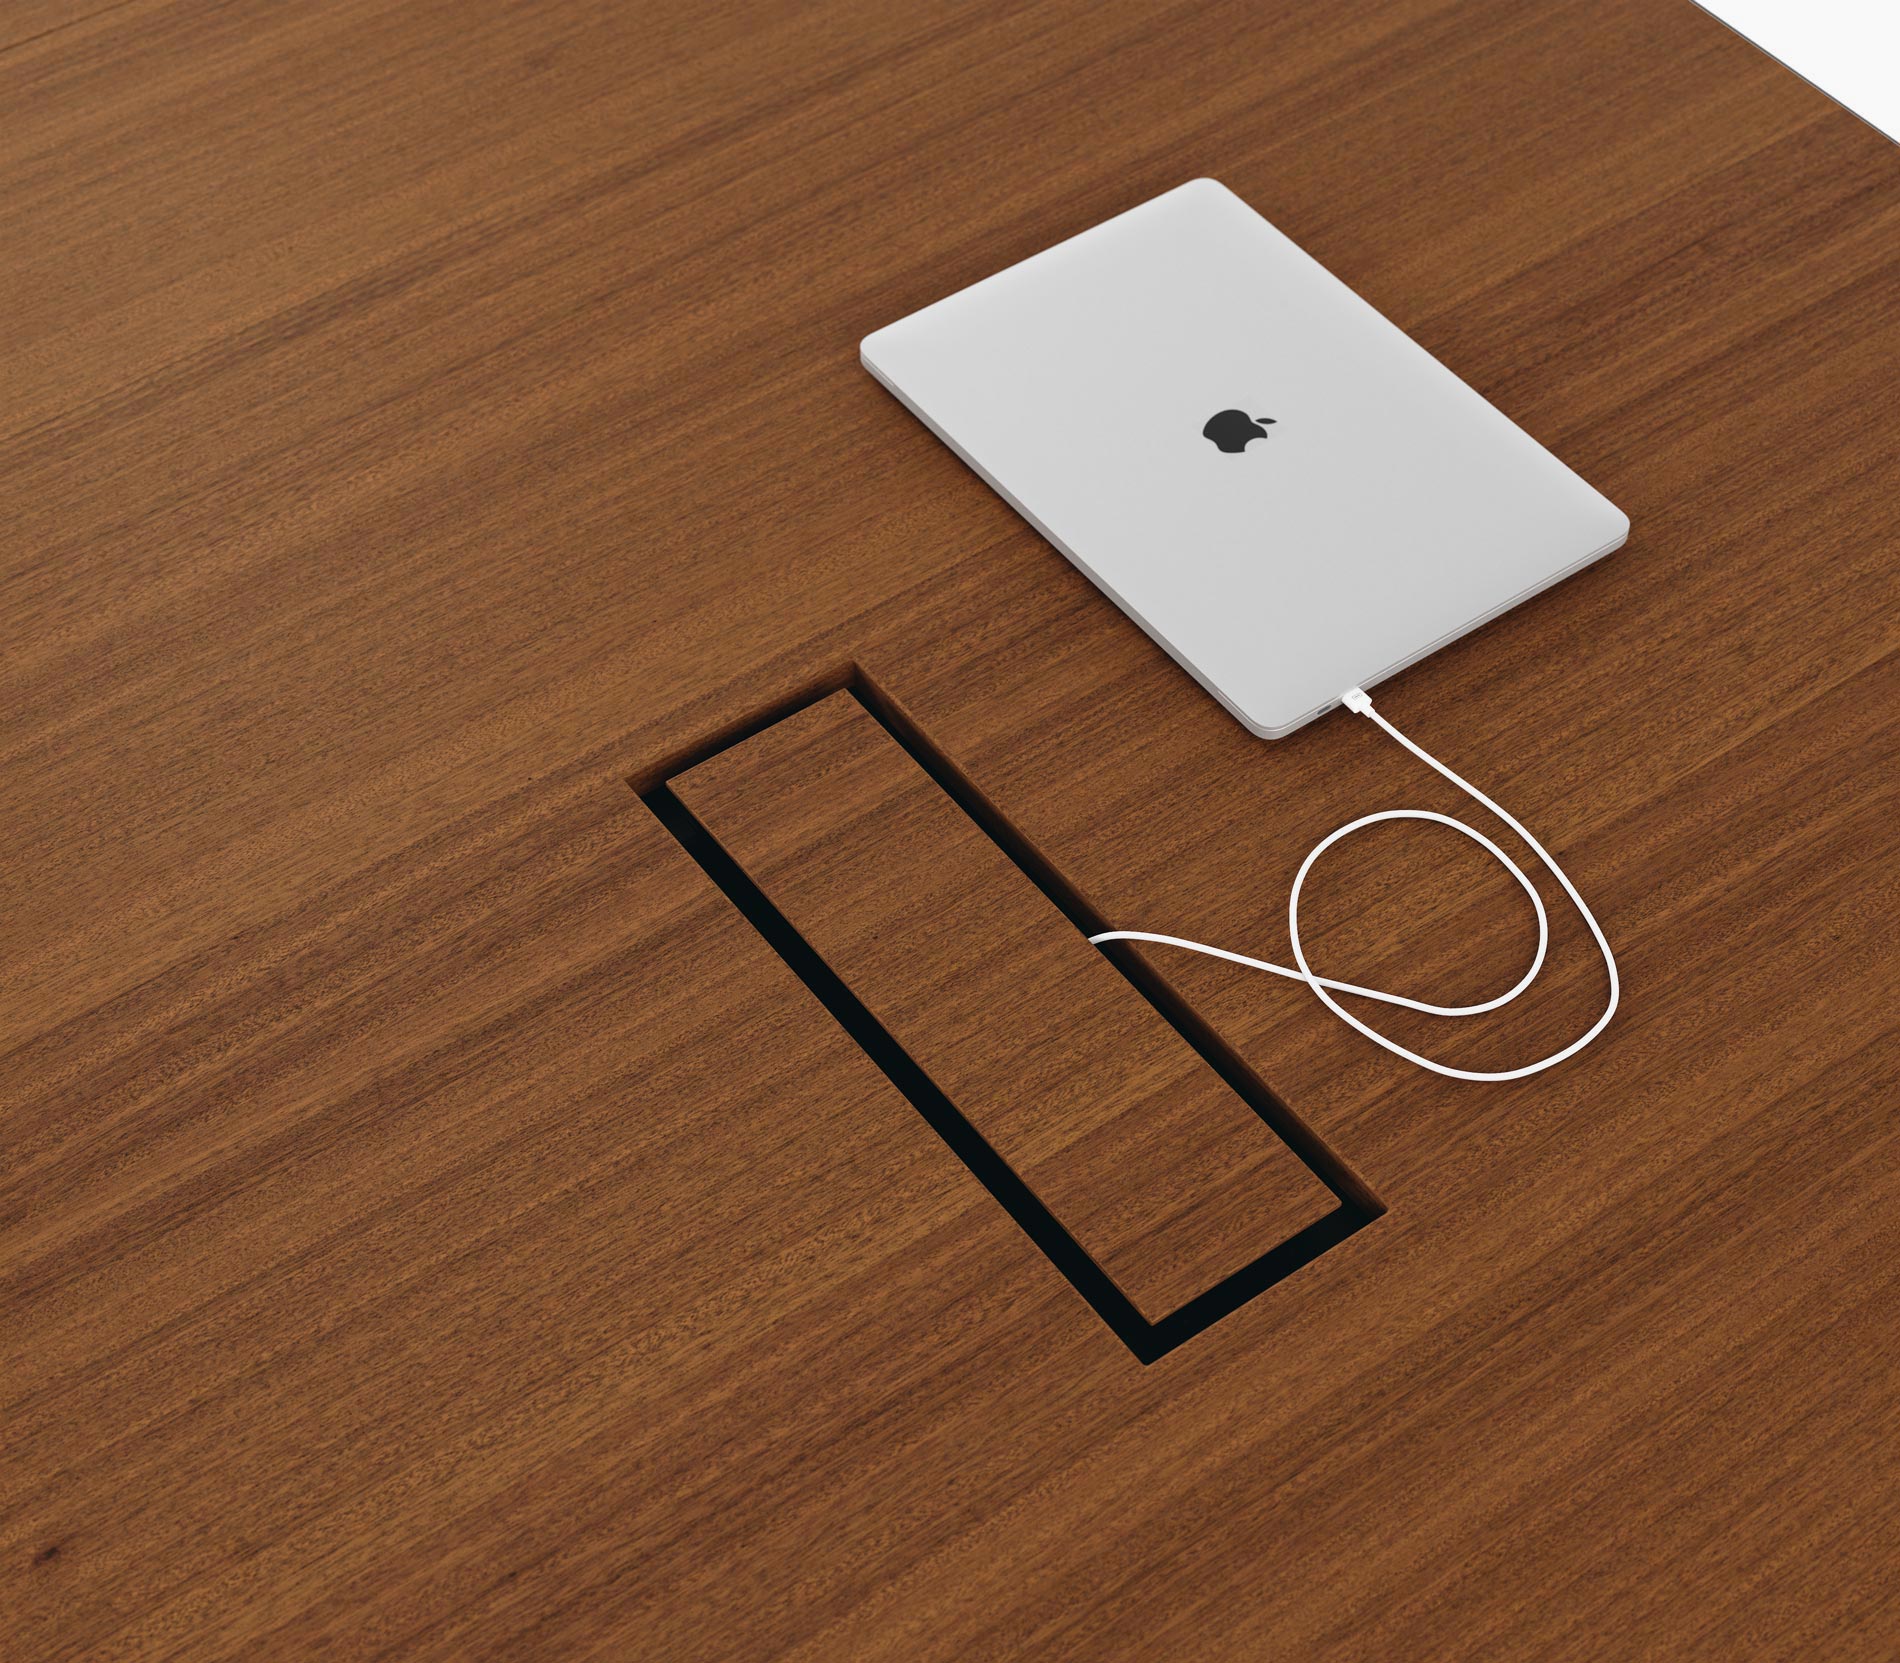 Tabletop power access on a Highline Vector Conference Table in natural quarter cut walnut